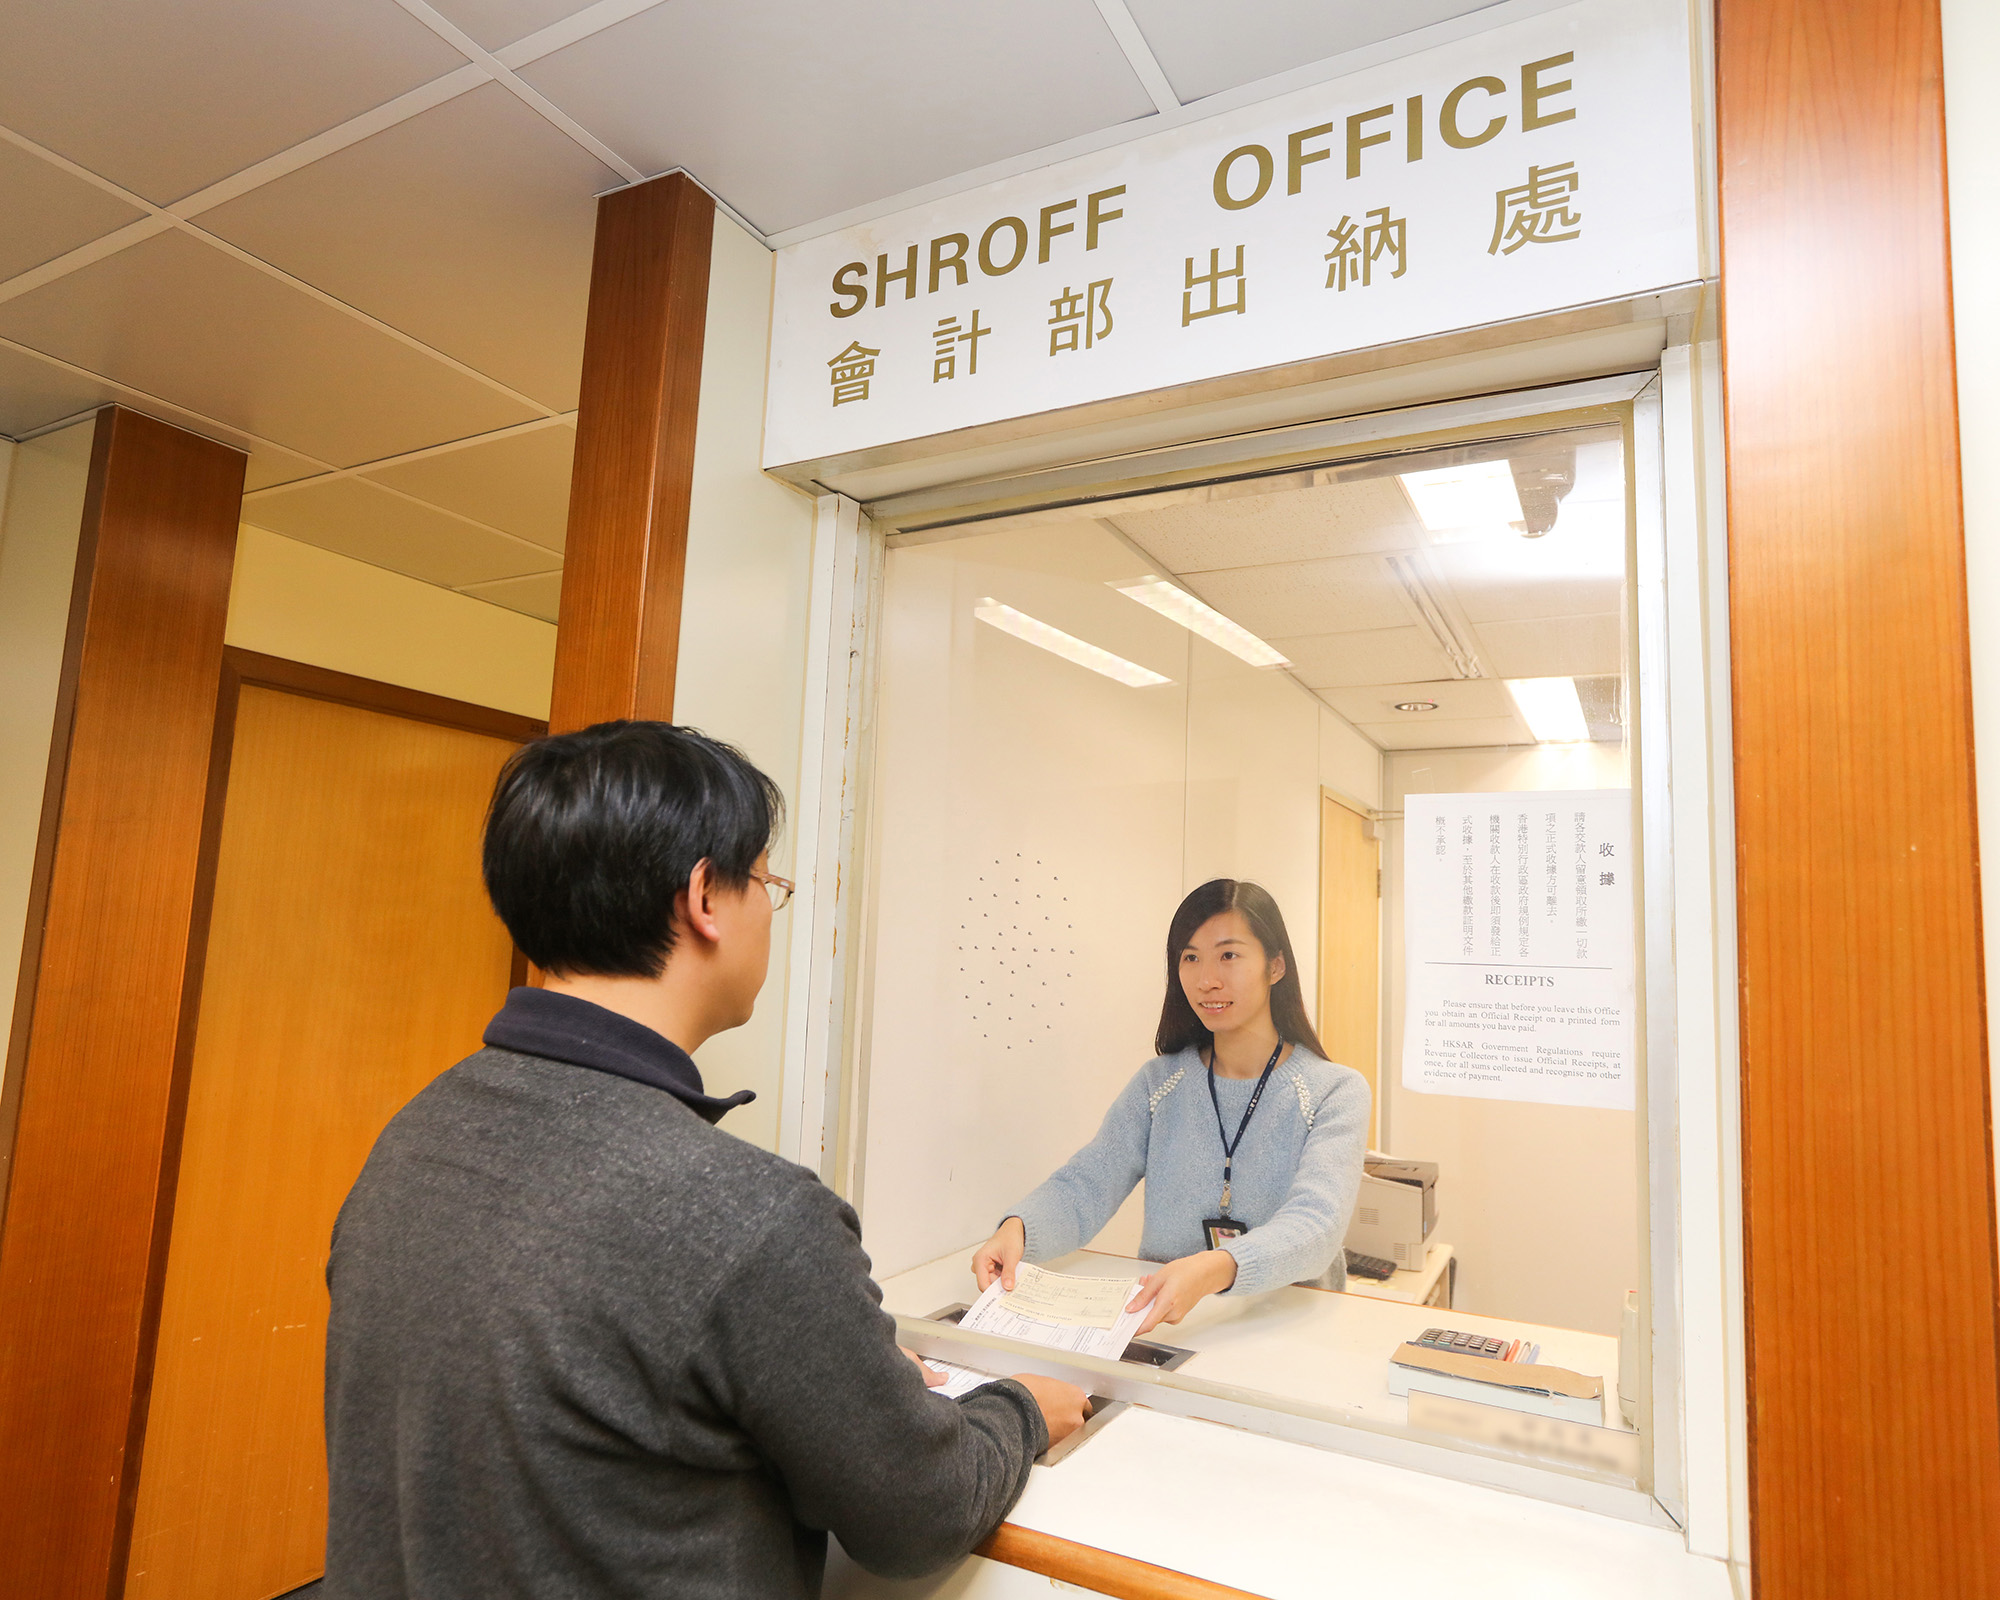 The Accounts Section is responsible for all financial and accounting operations including the collection and payment services of the Shroff Office.